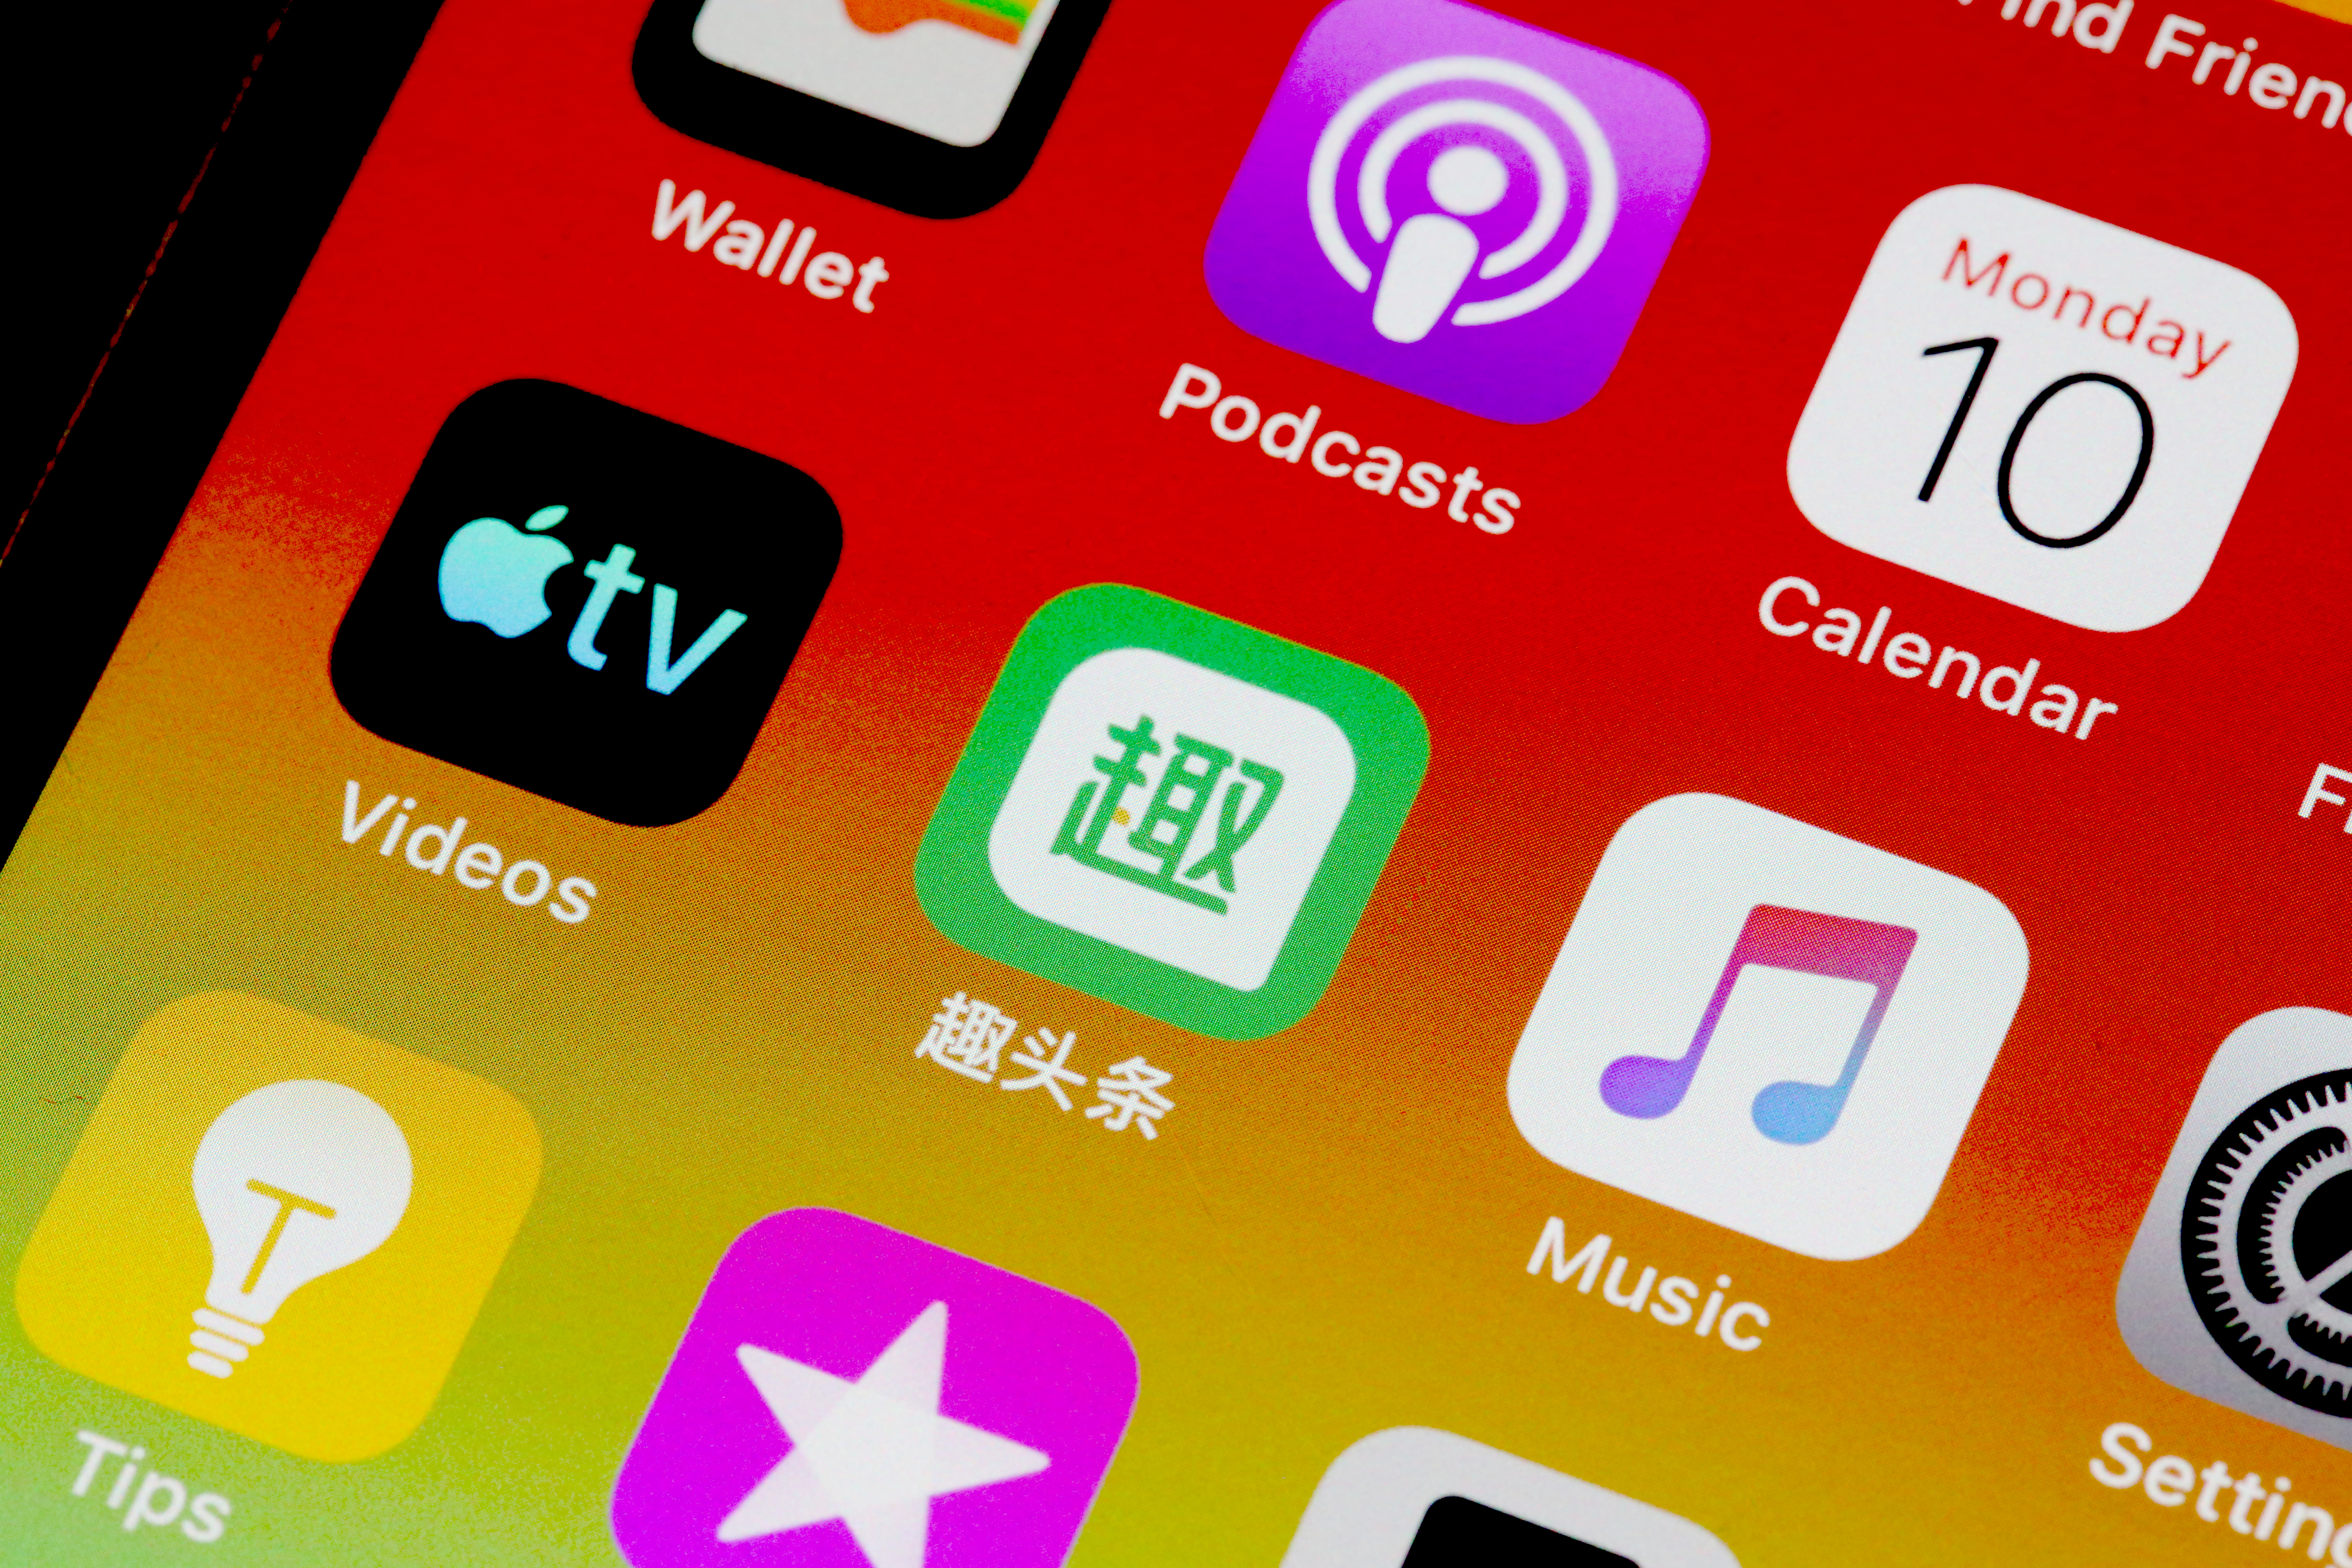 Chinese news app Qutoutiao’s stocks tumble after public shaming by state broadcaster